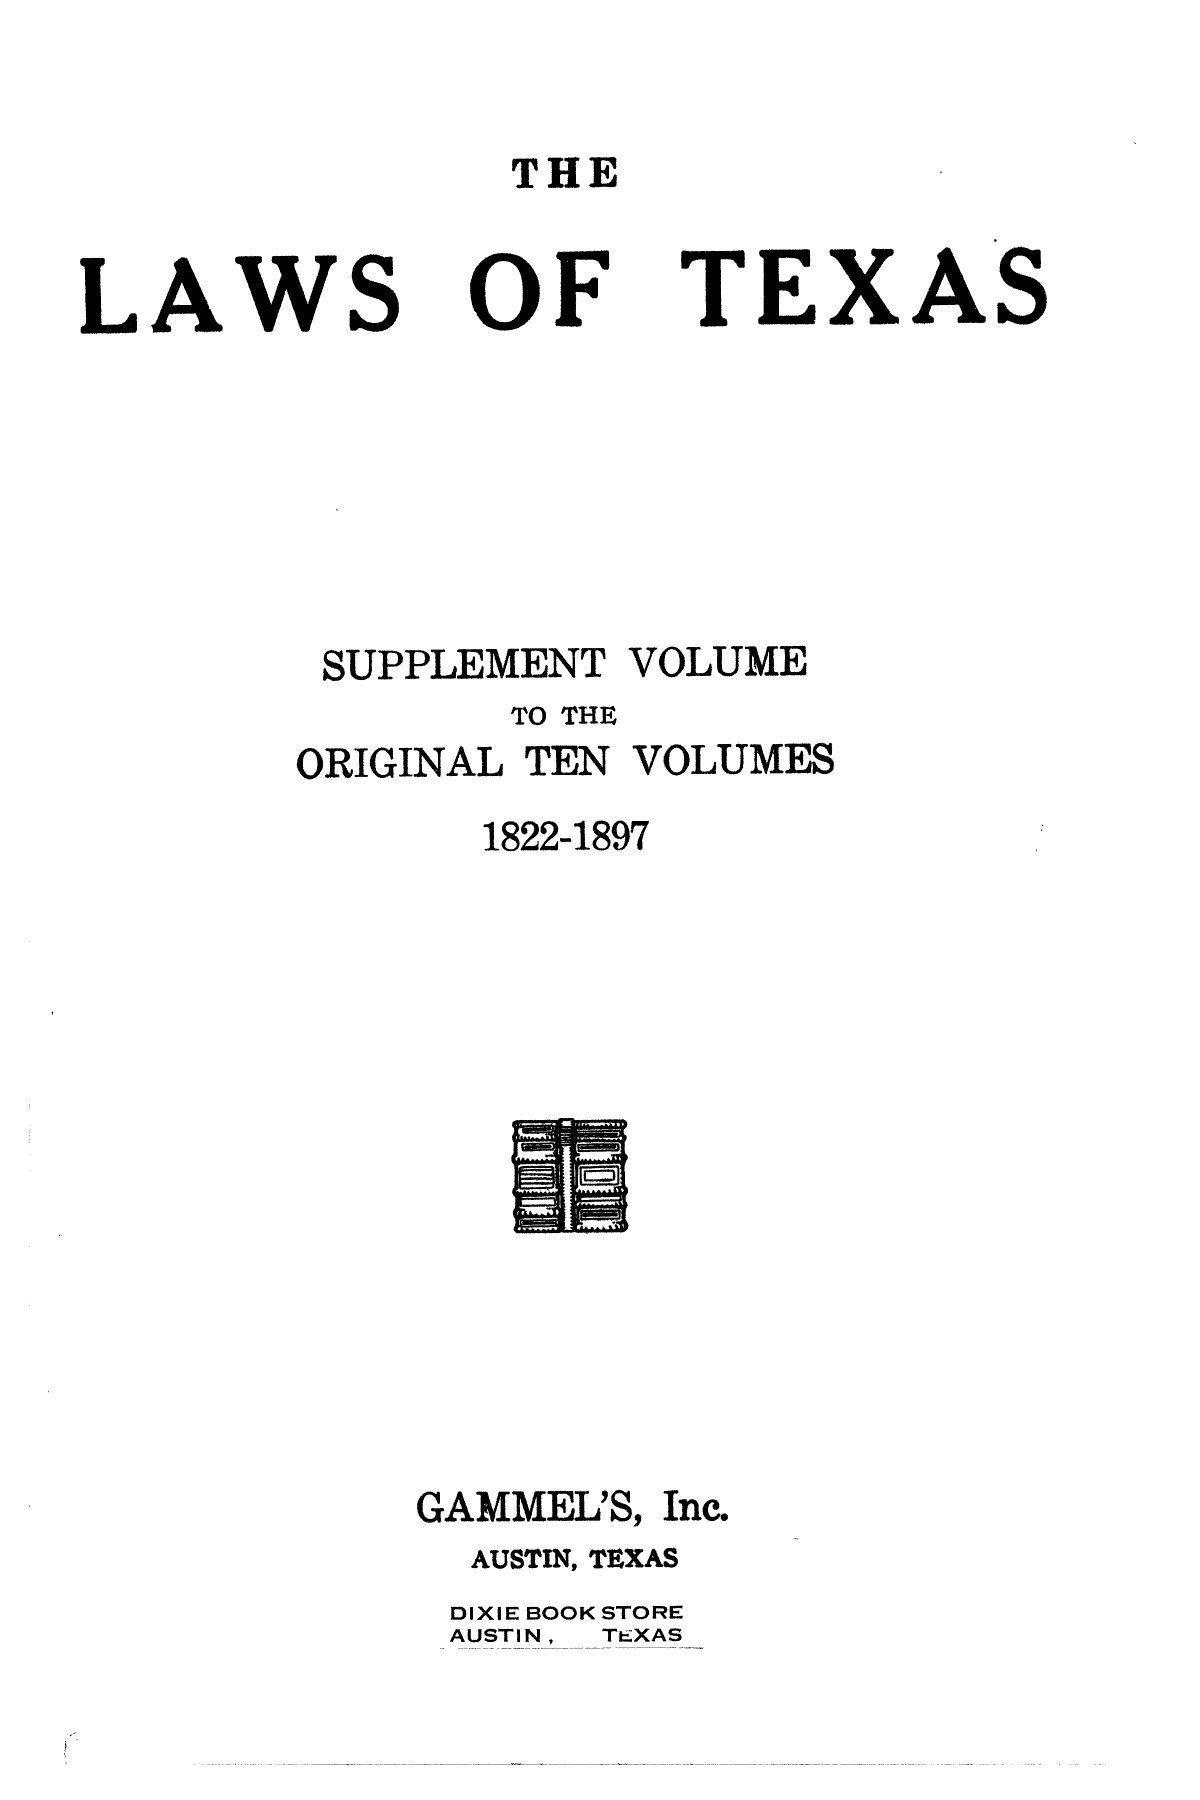 The Laws of Texas, 1937-1939 [Volume 31]
                                                
                                                    [Sequence #]: 1 of 1313
                                                